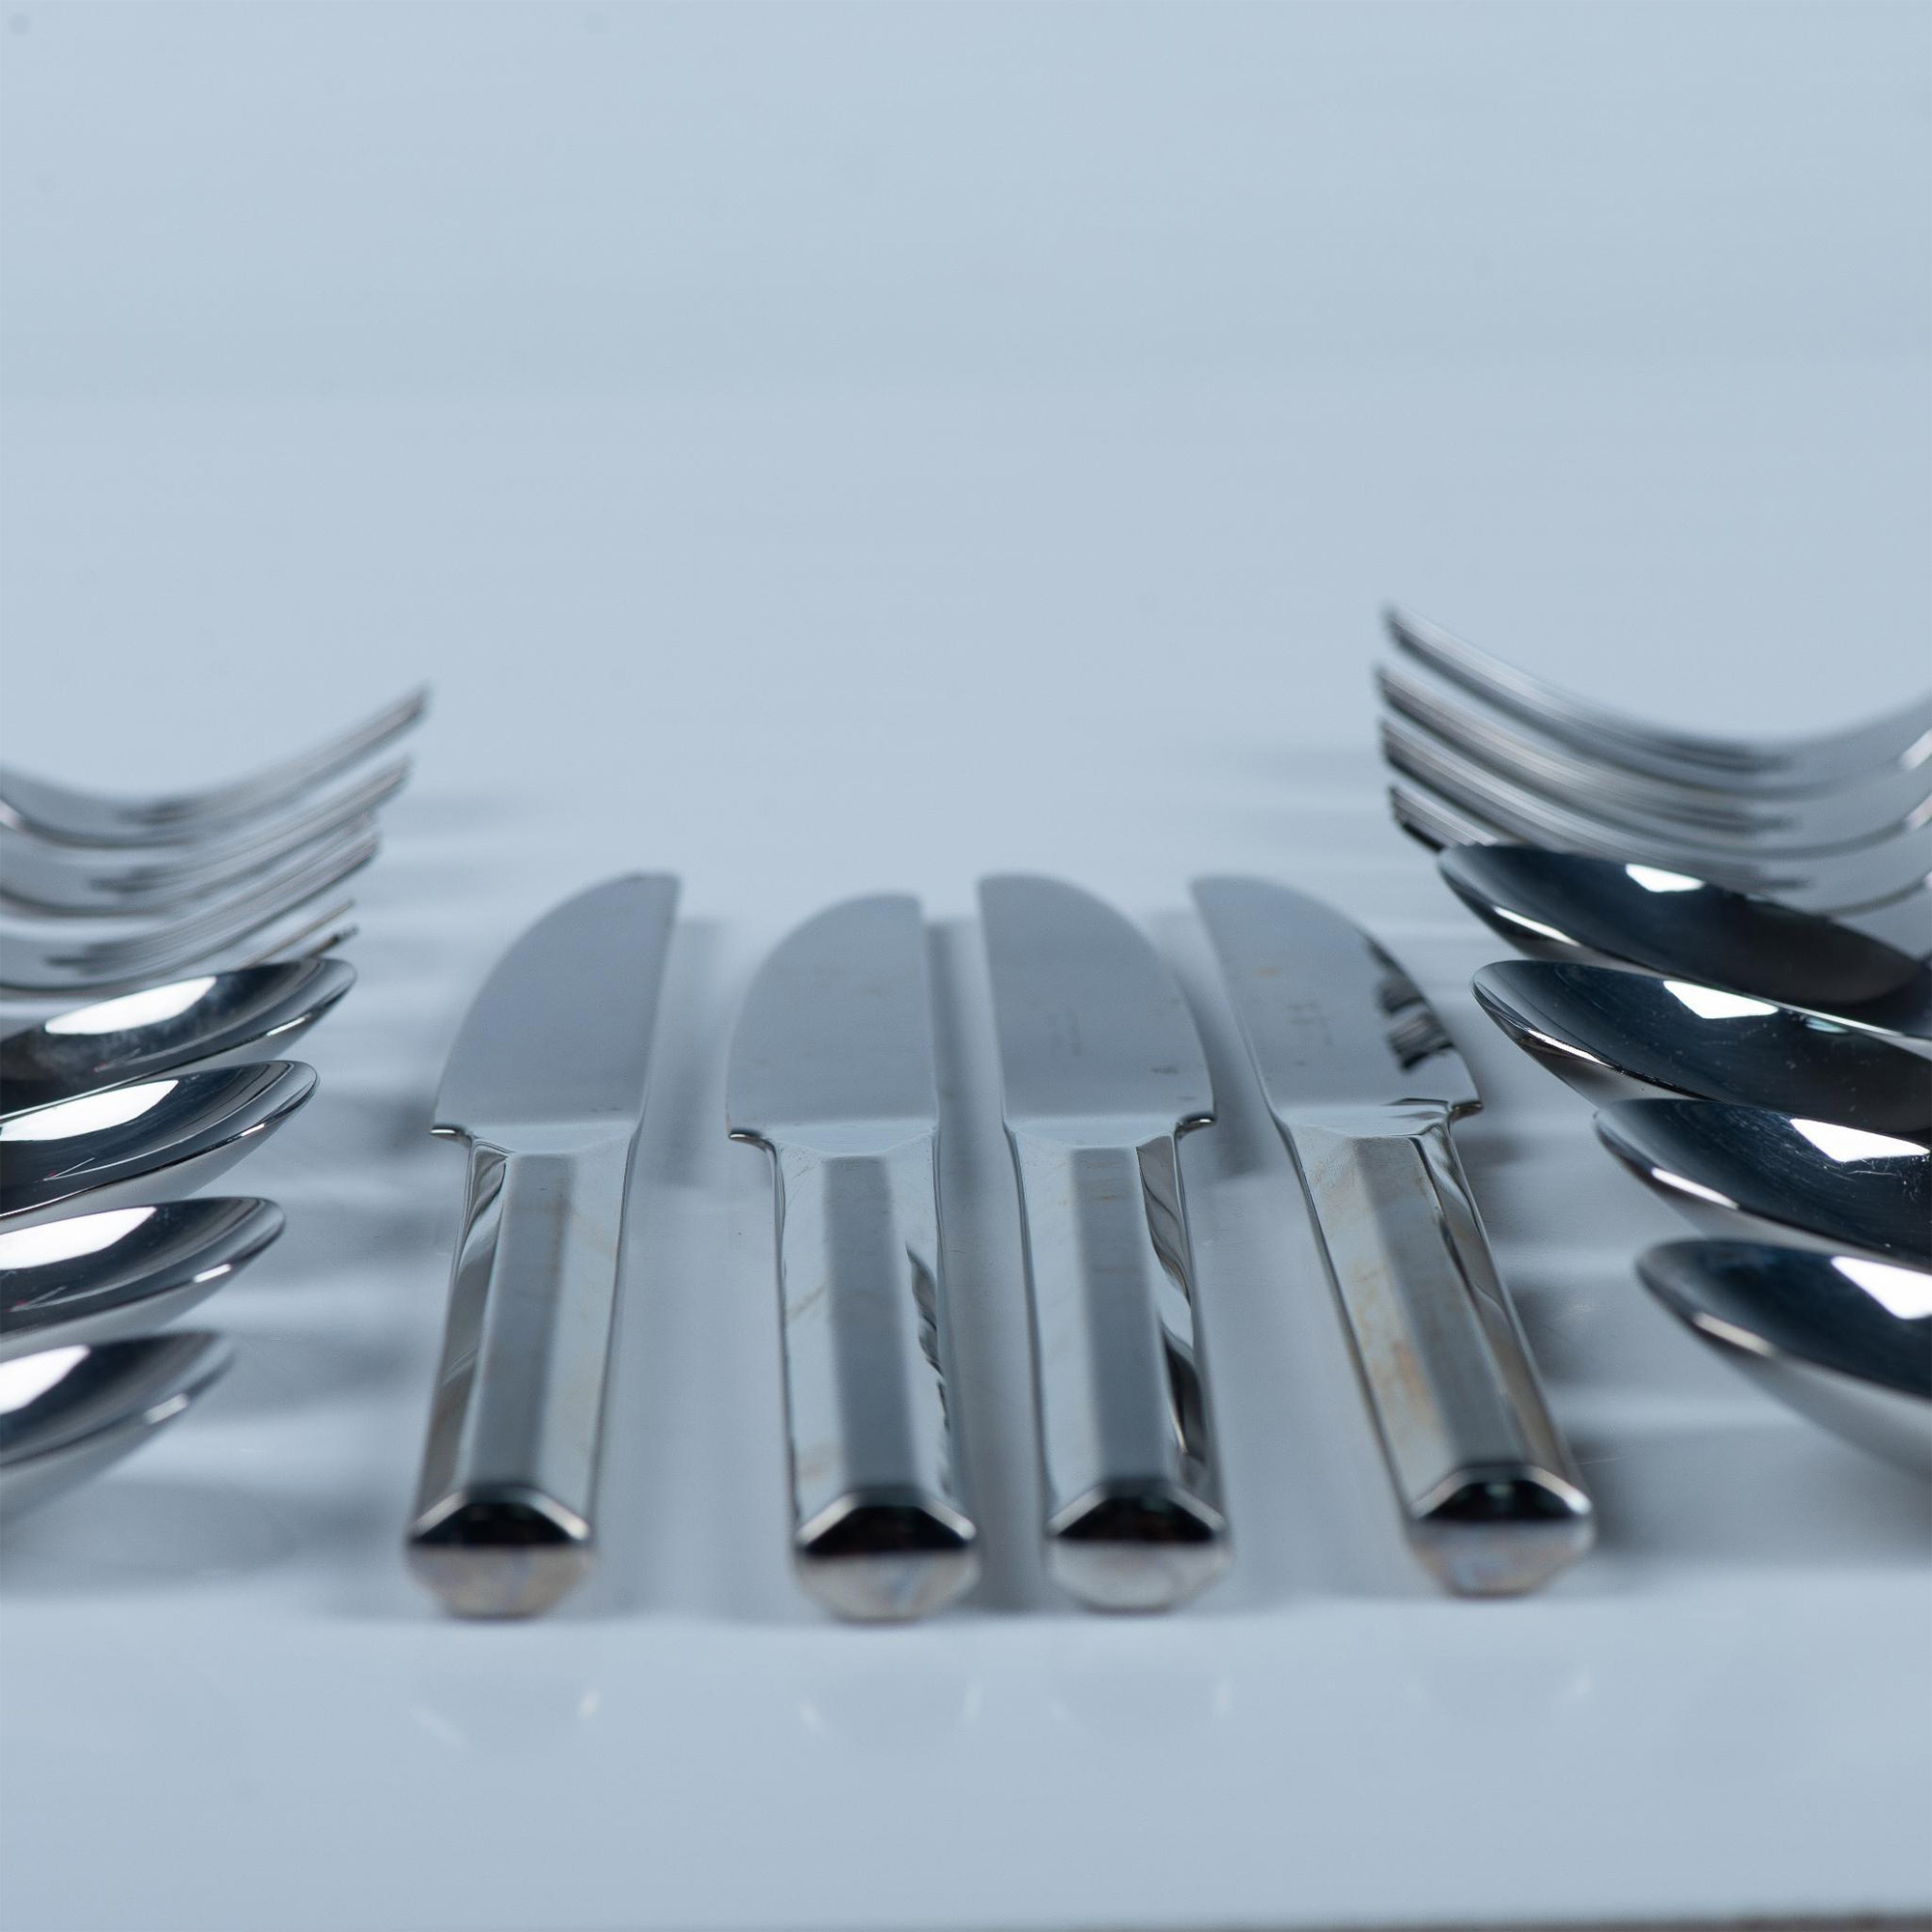 20pc Sasaki Stainless Steel Flatware Set, Service for 4 - Image 4 of 12